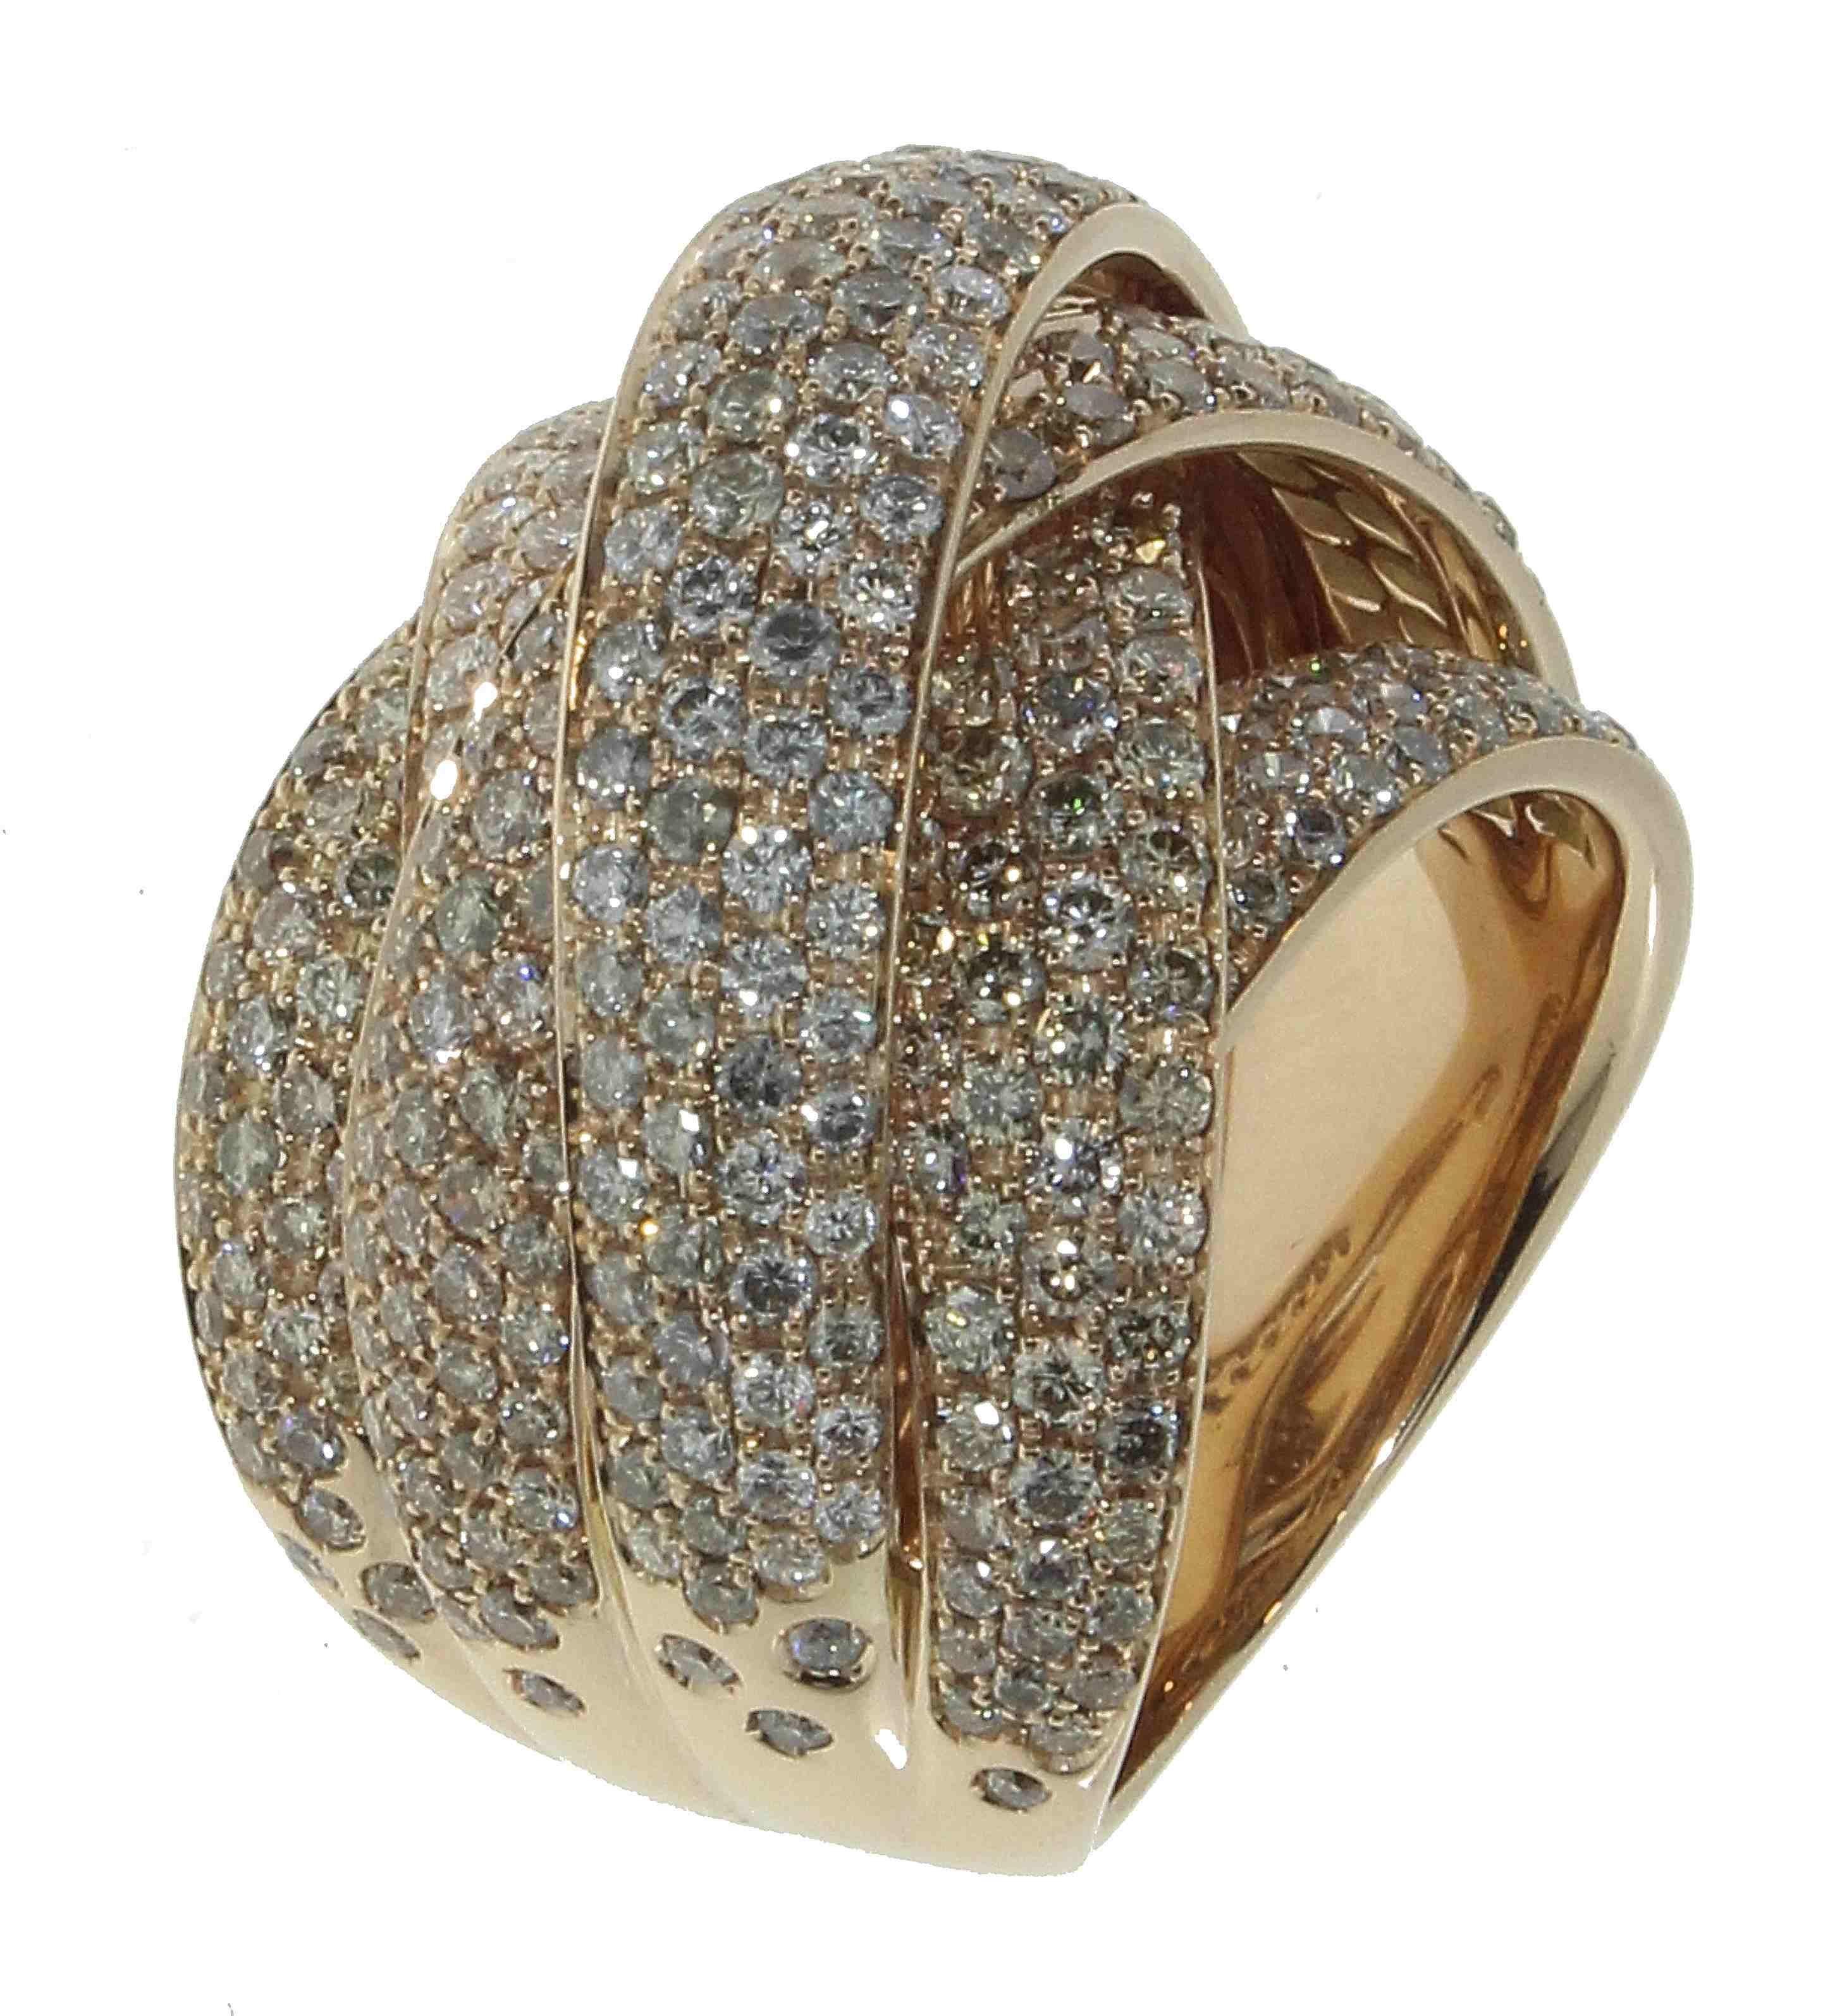 With crisscrossing bands that loop in elegant curves, this glamorous and sparkling ring will look splendid on any finger. It is handcrafted in 18kt yellow gold and the intertwining bands are encrusted with white, chocolate, and grey brilliant-cut